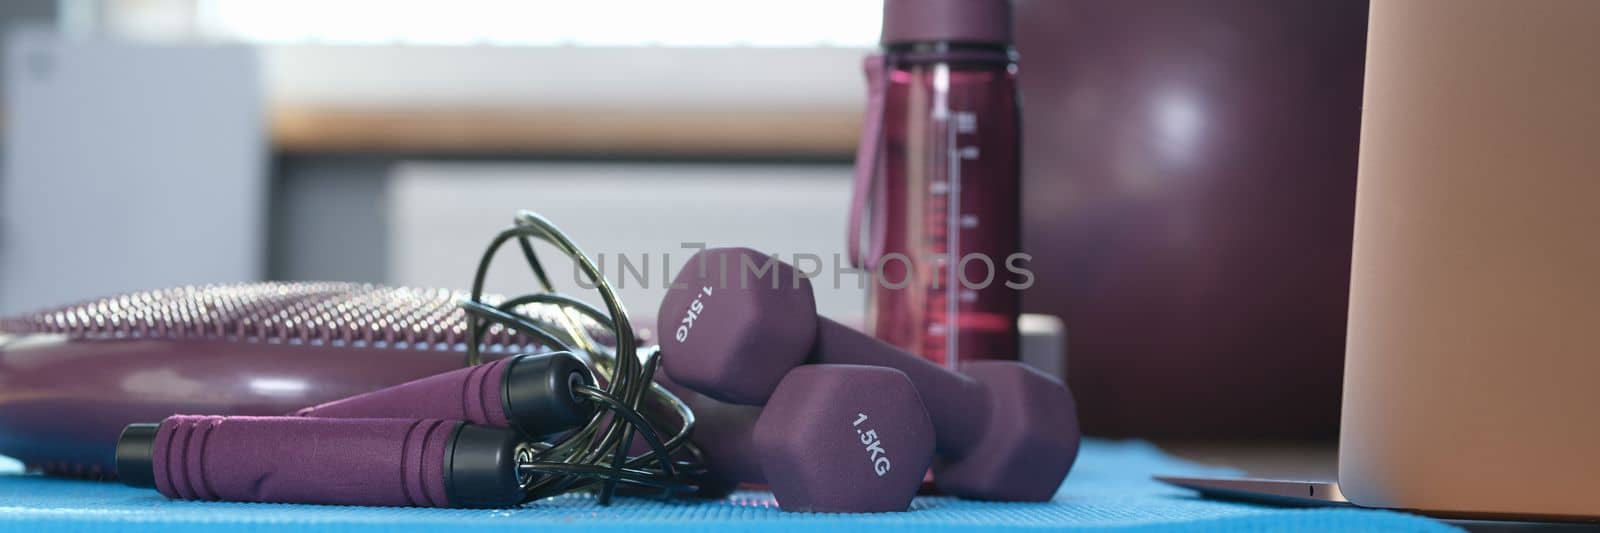 Gym equipment for training at home closeup by kuprevich